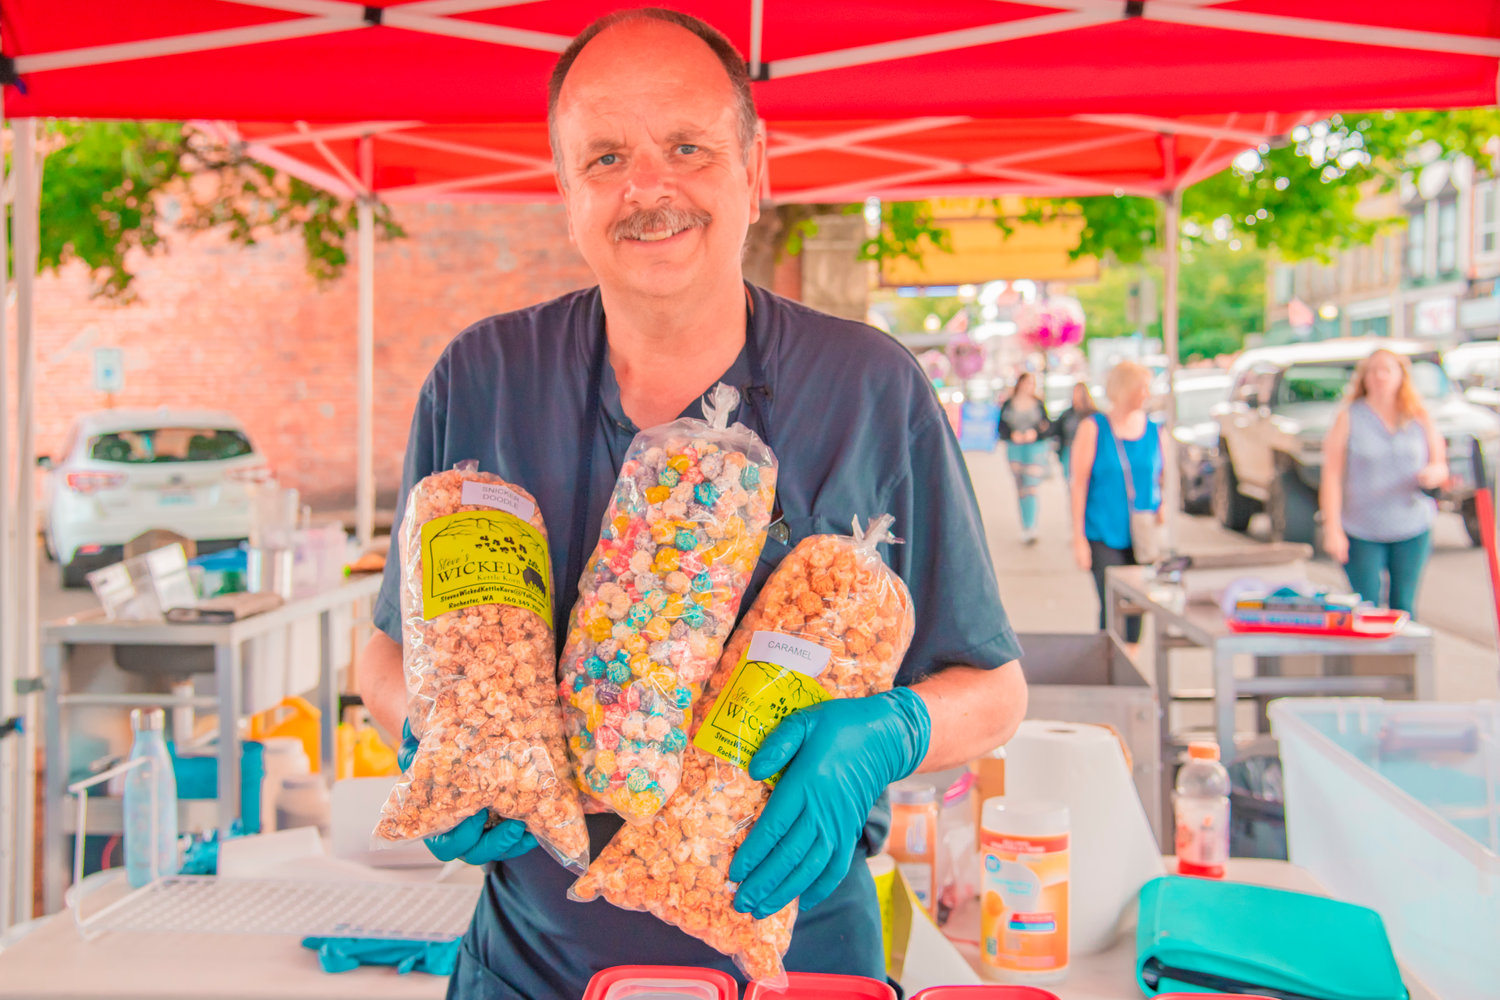 Steve Smythe, of Steve's Wicked Kettle Korn, poses for a photo with bags of flavored popcorn during Antique Fest in downtown Centralia on Friday.